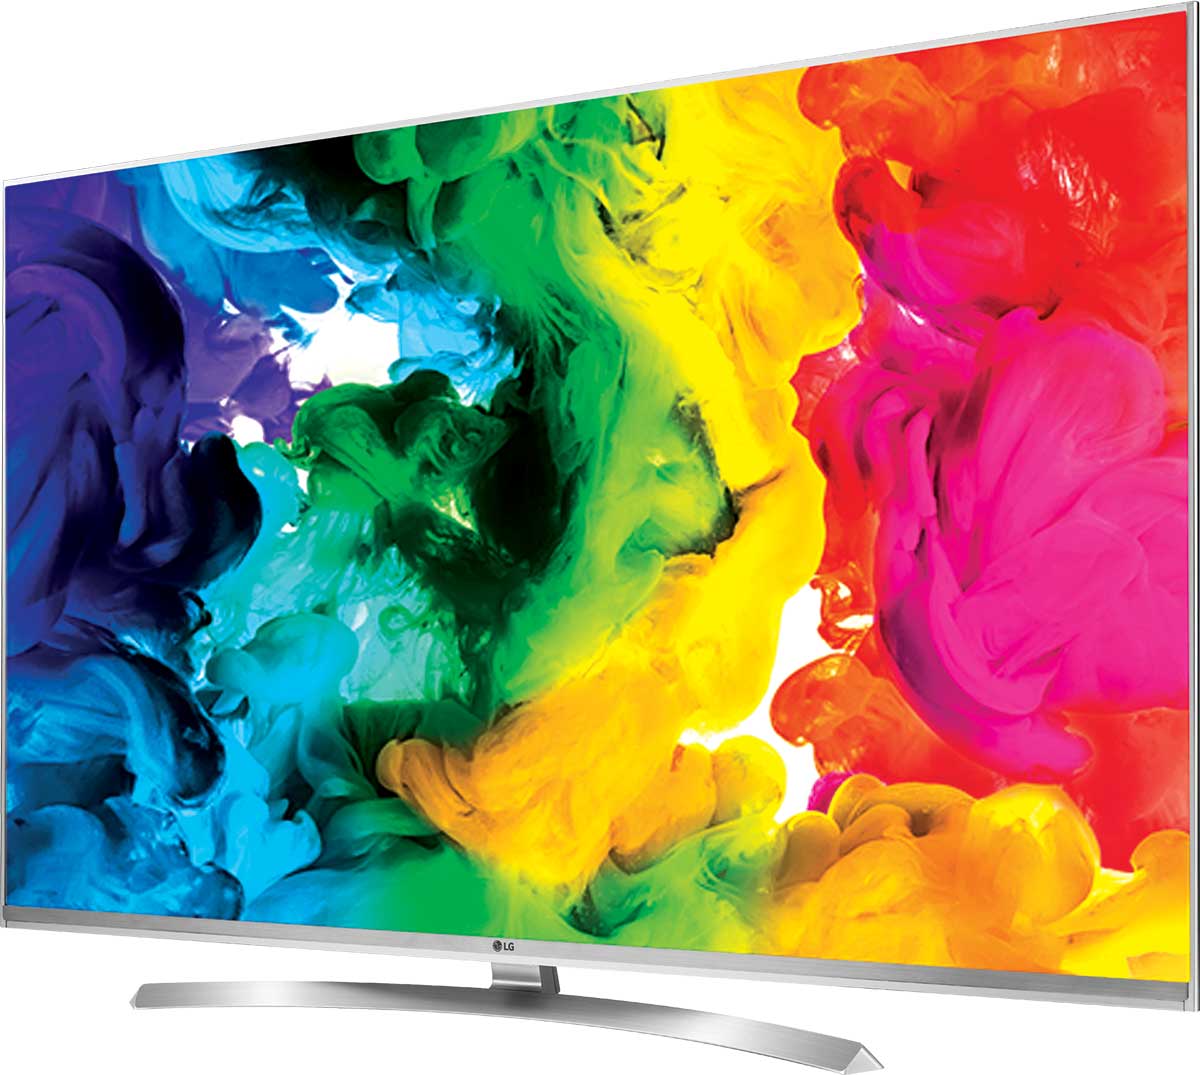 LG introduces more features in its Super UHD TVs